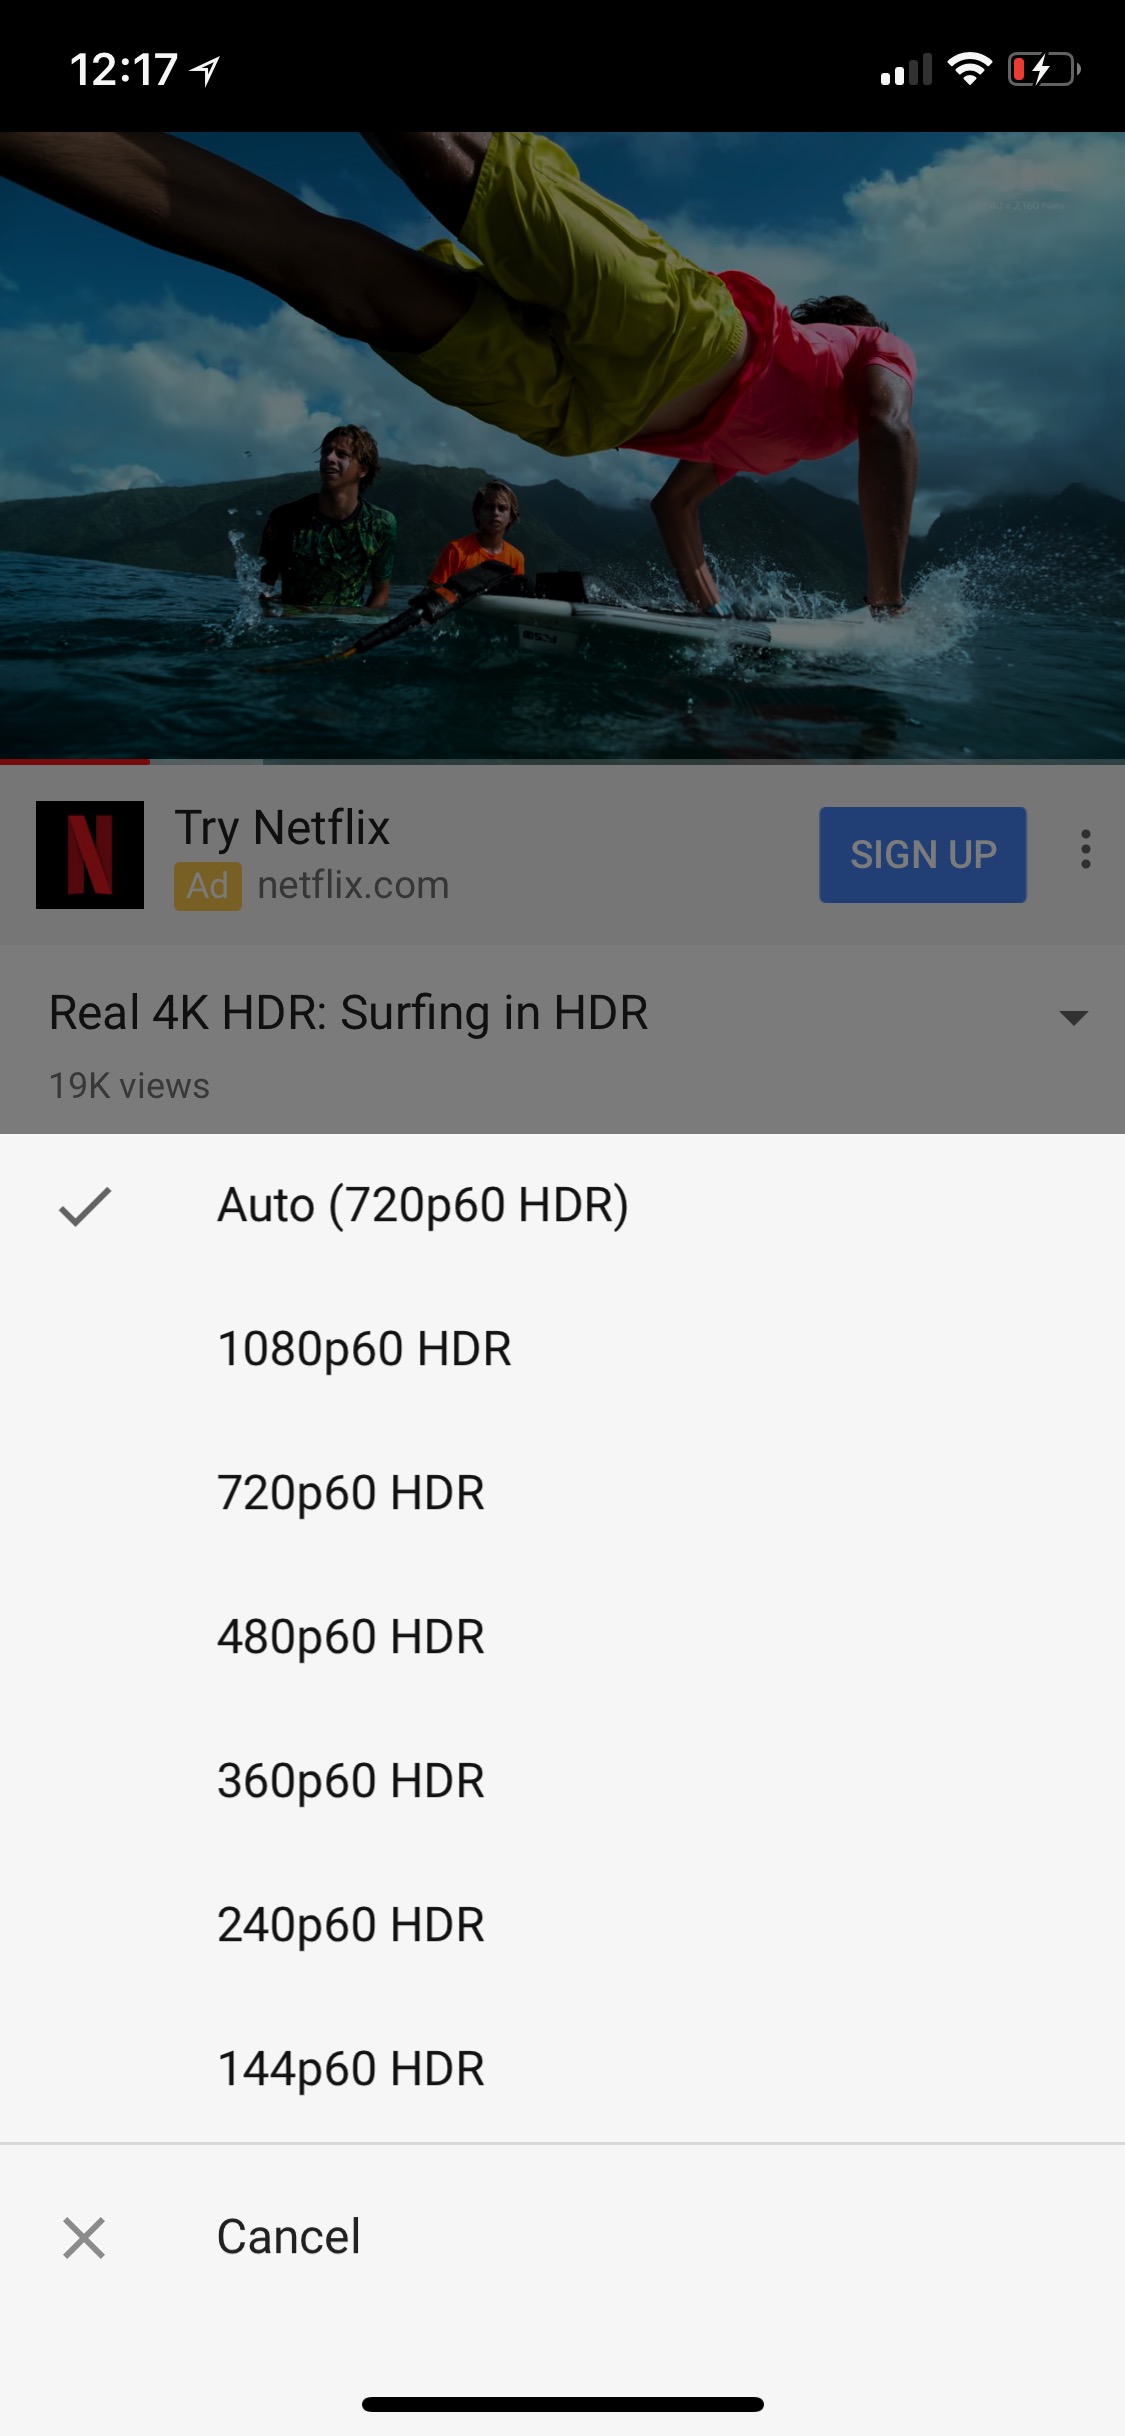 YouTube App Now Supports HDR on iPhone X